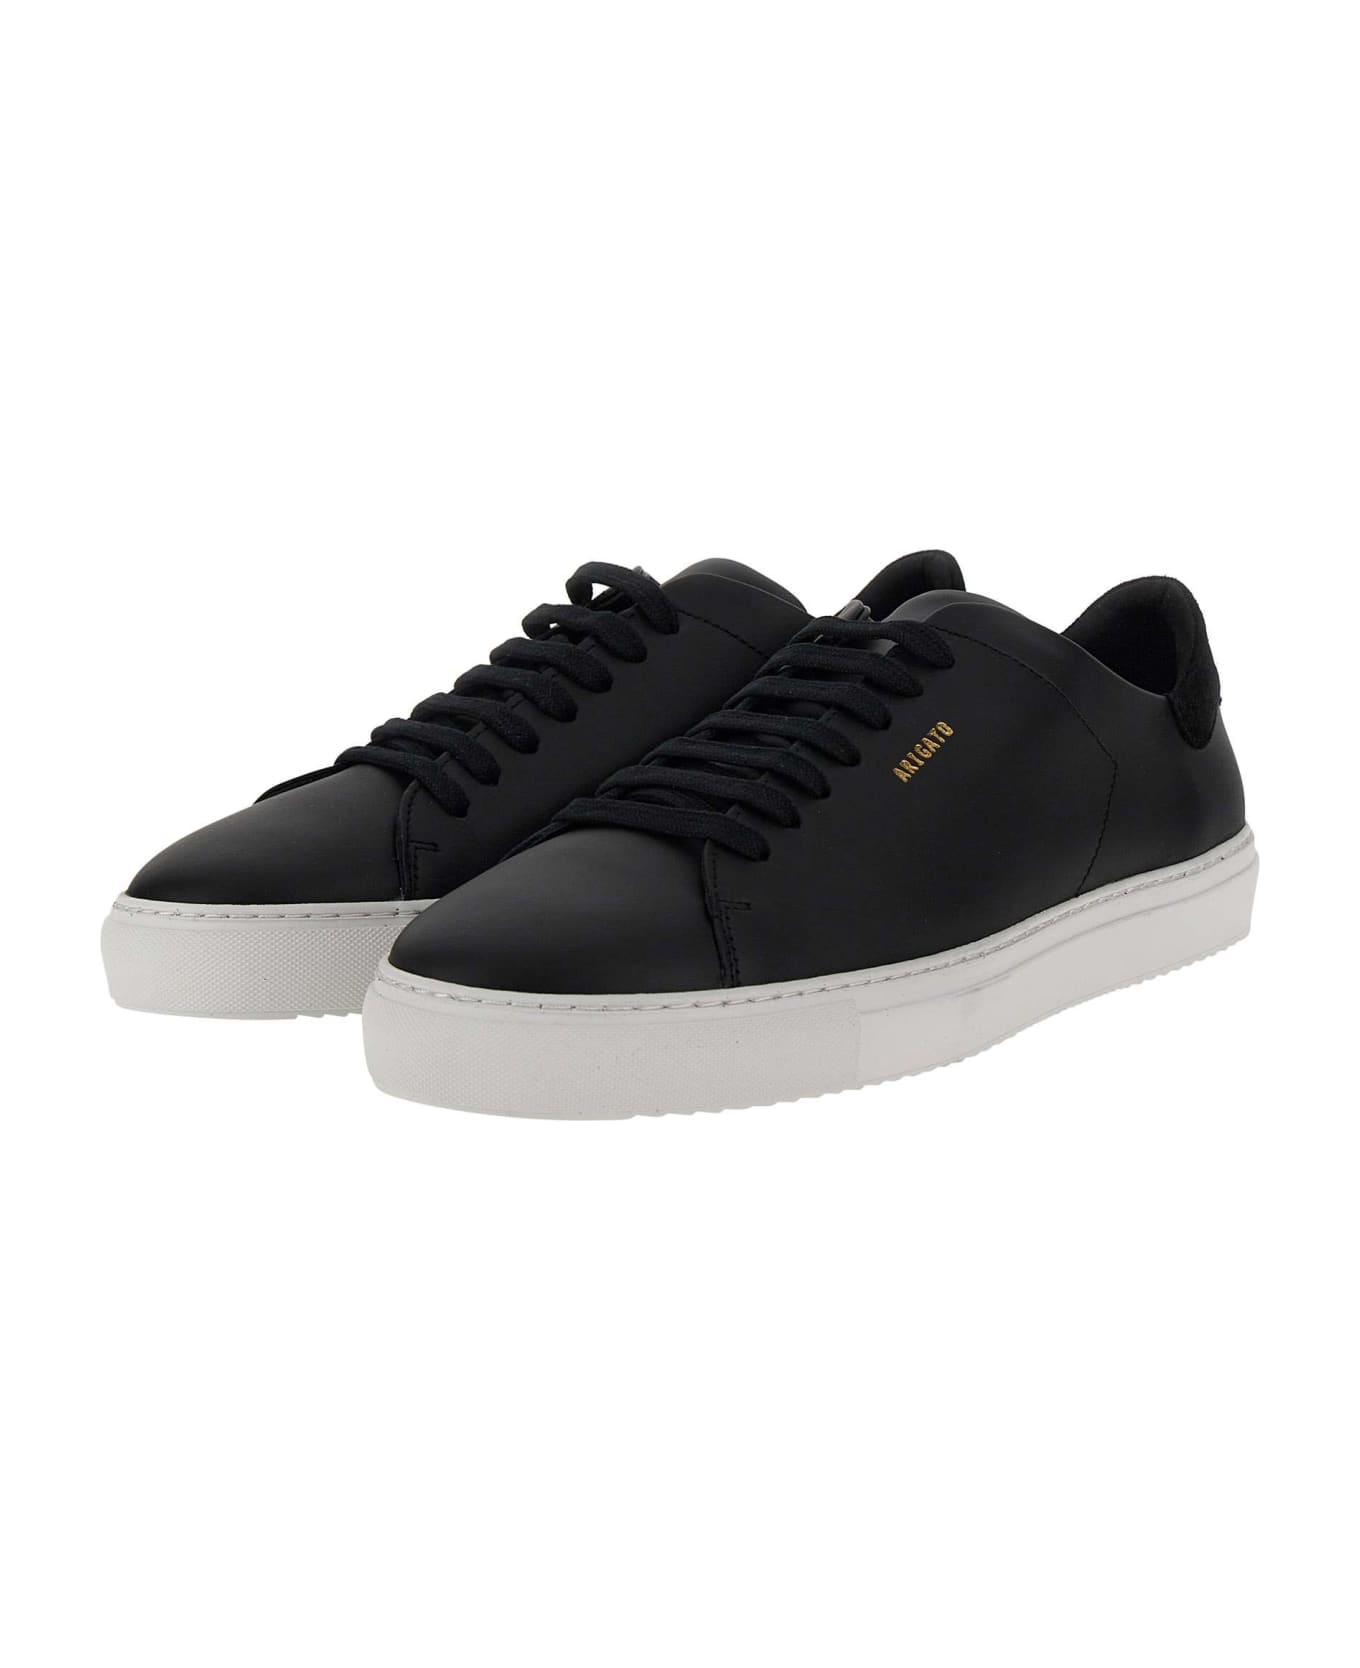 Axel Arigato "clean 90" Sneakers Leather - BLACK スニーカー